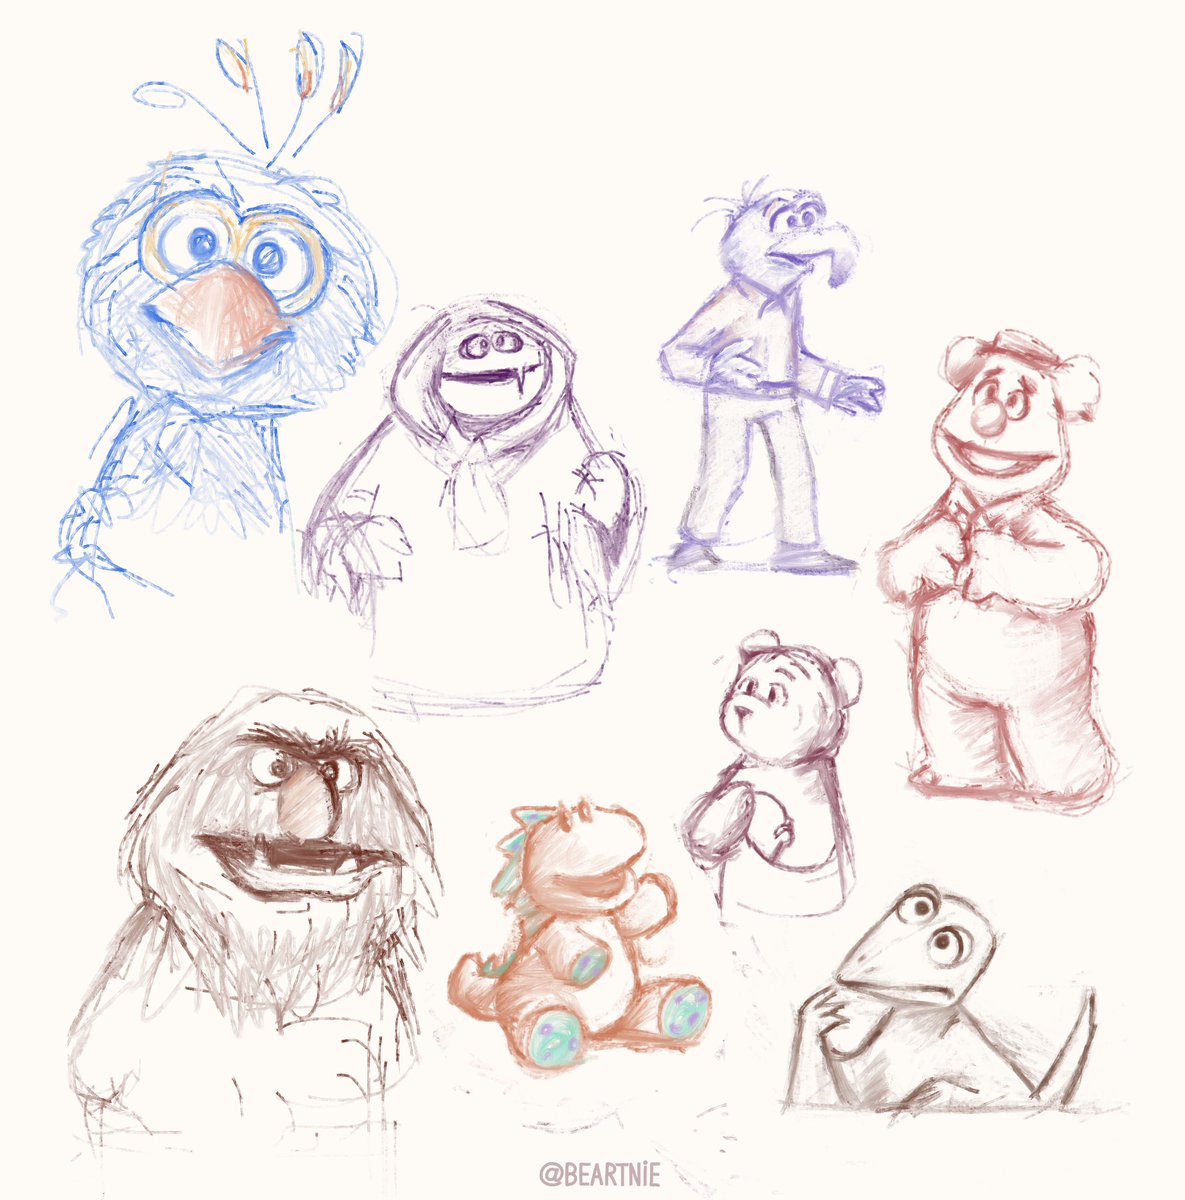 Here’s all the puppet requests I could finish before I got tired